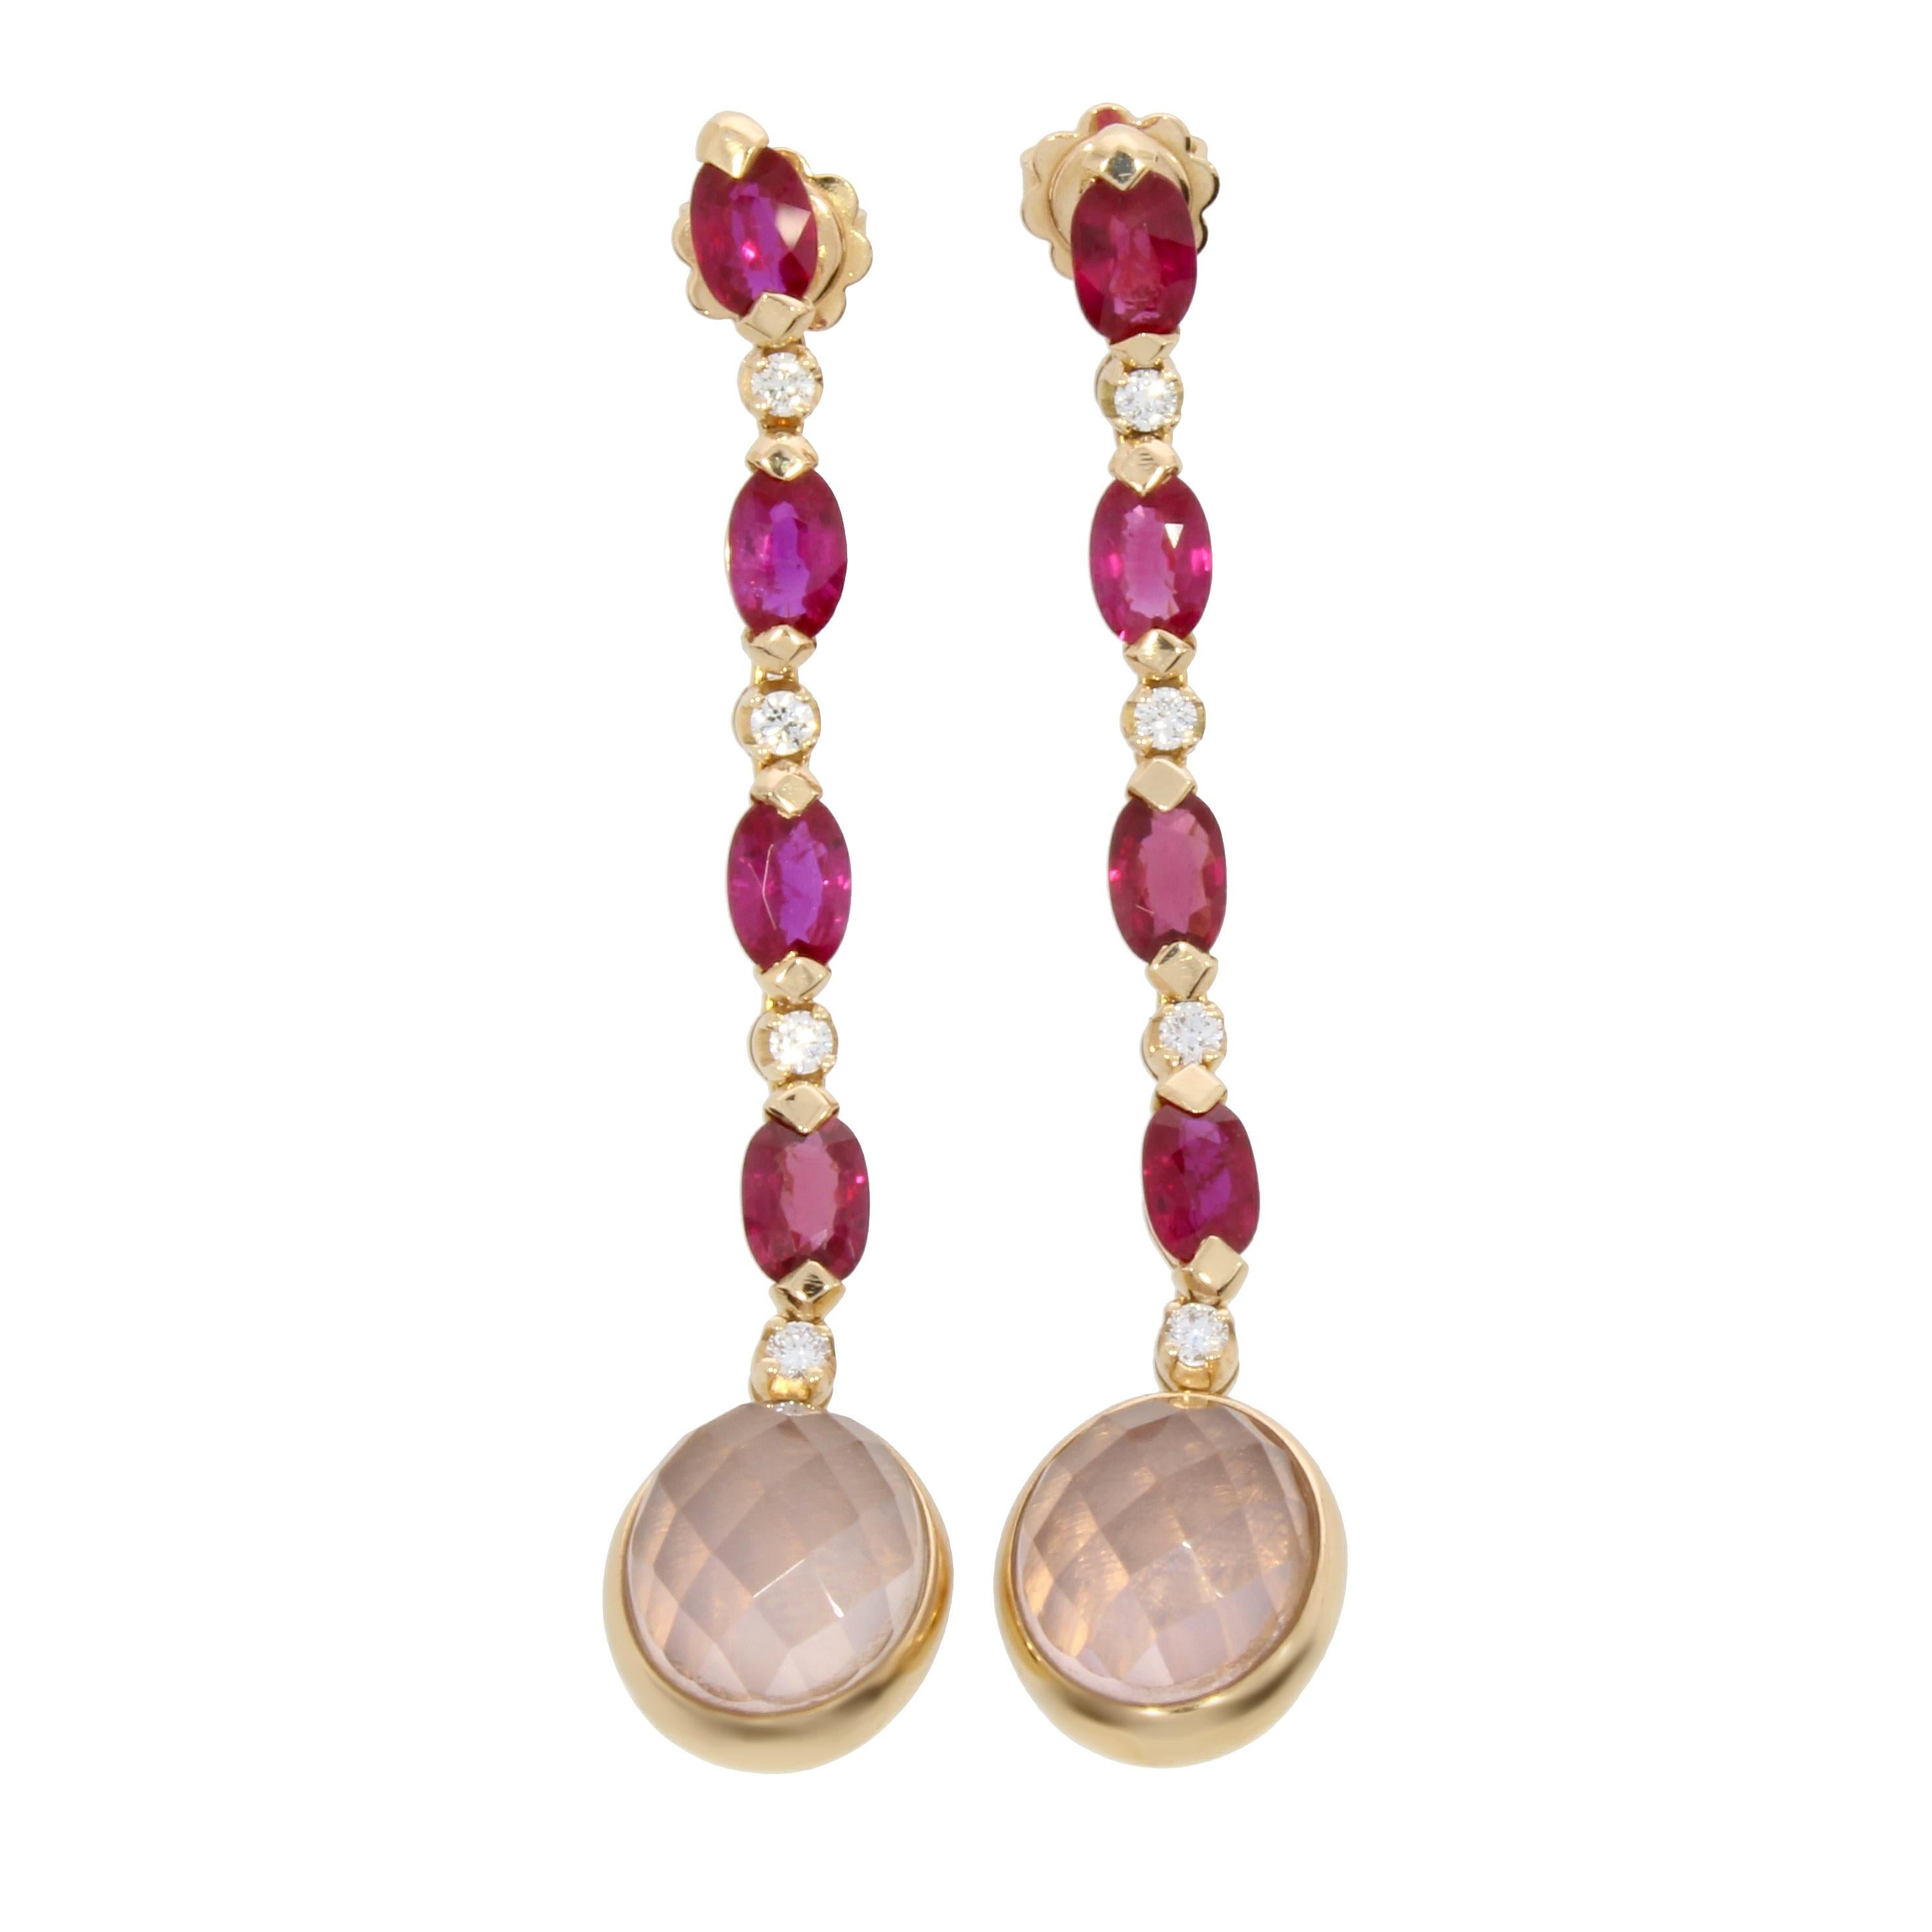 A captivating pair of rotating pink quartz pendants delicately suspended on an elegant arrangement of oval cut rubies and brilliant cut diamonds.

Drop Earrings Venice Collection by Niquesa
18 Rose Gold karat                                         